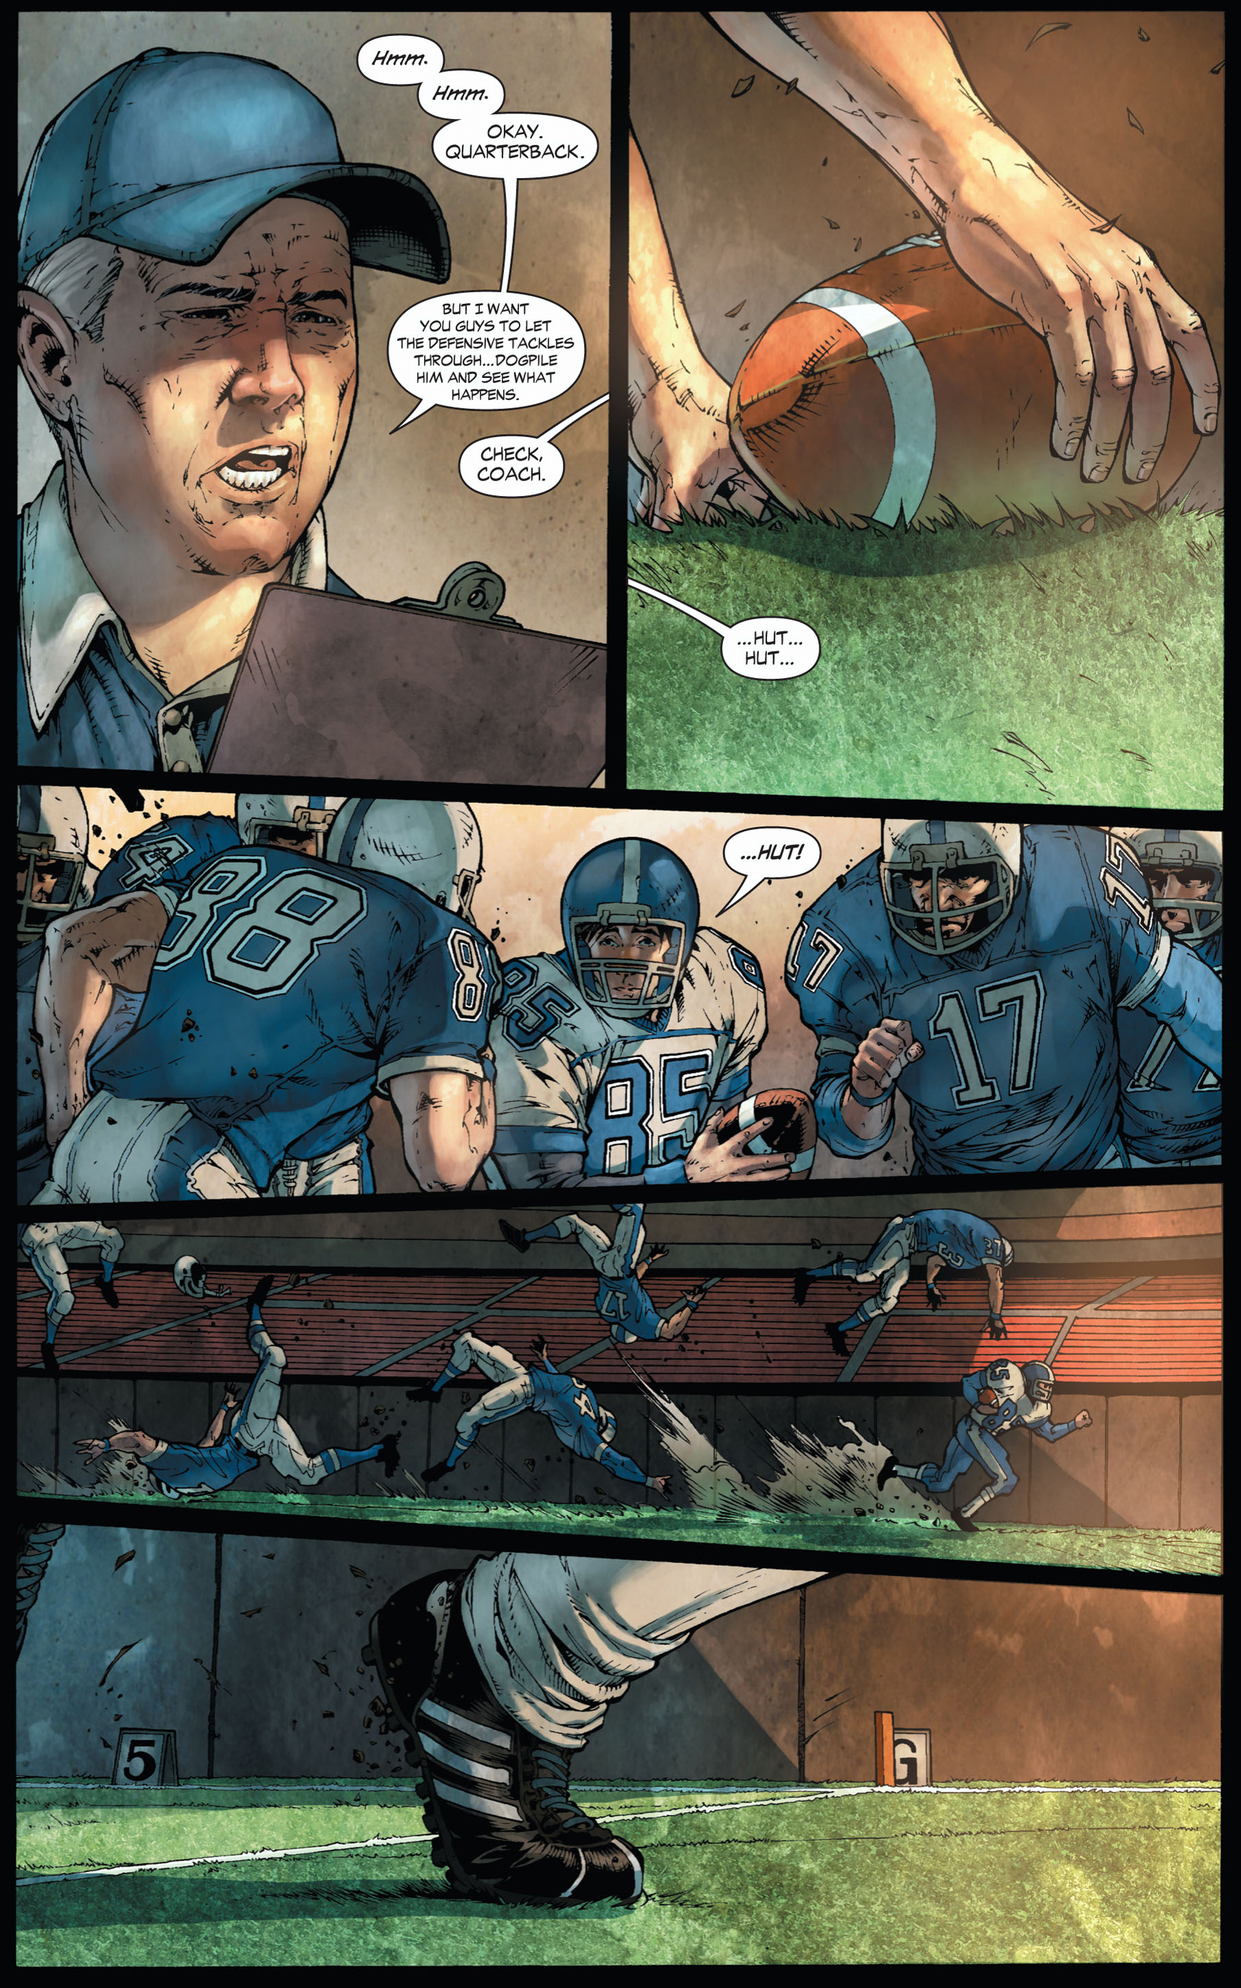 clark kent tries out for a football team